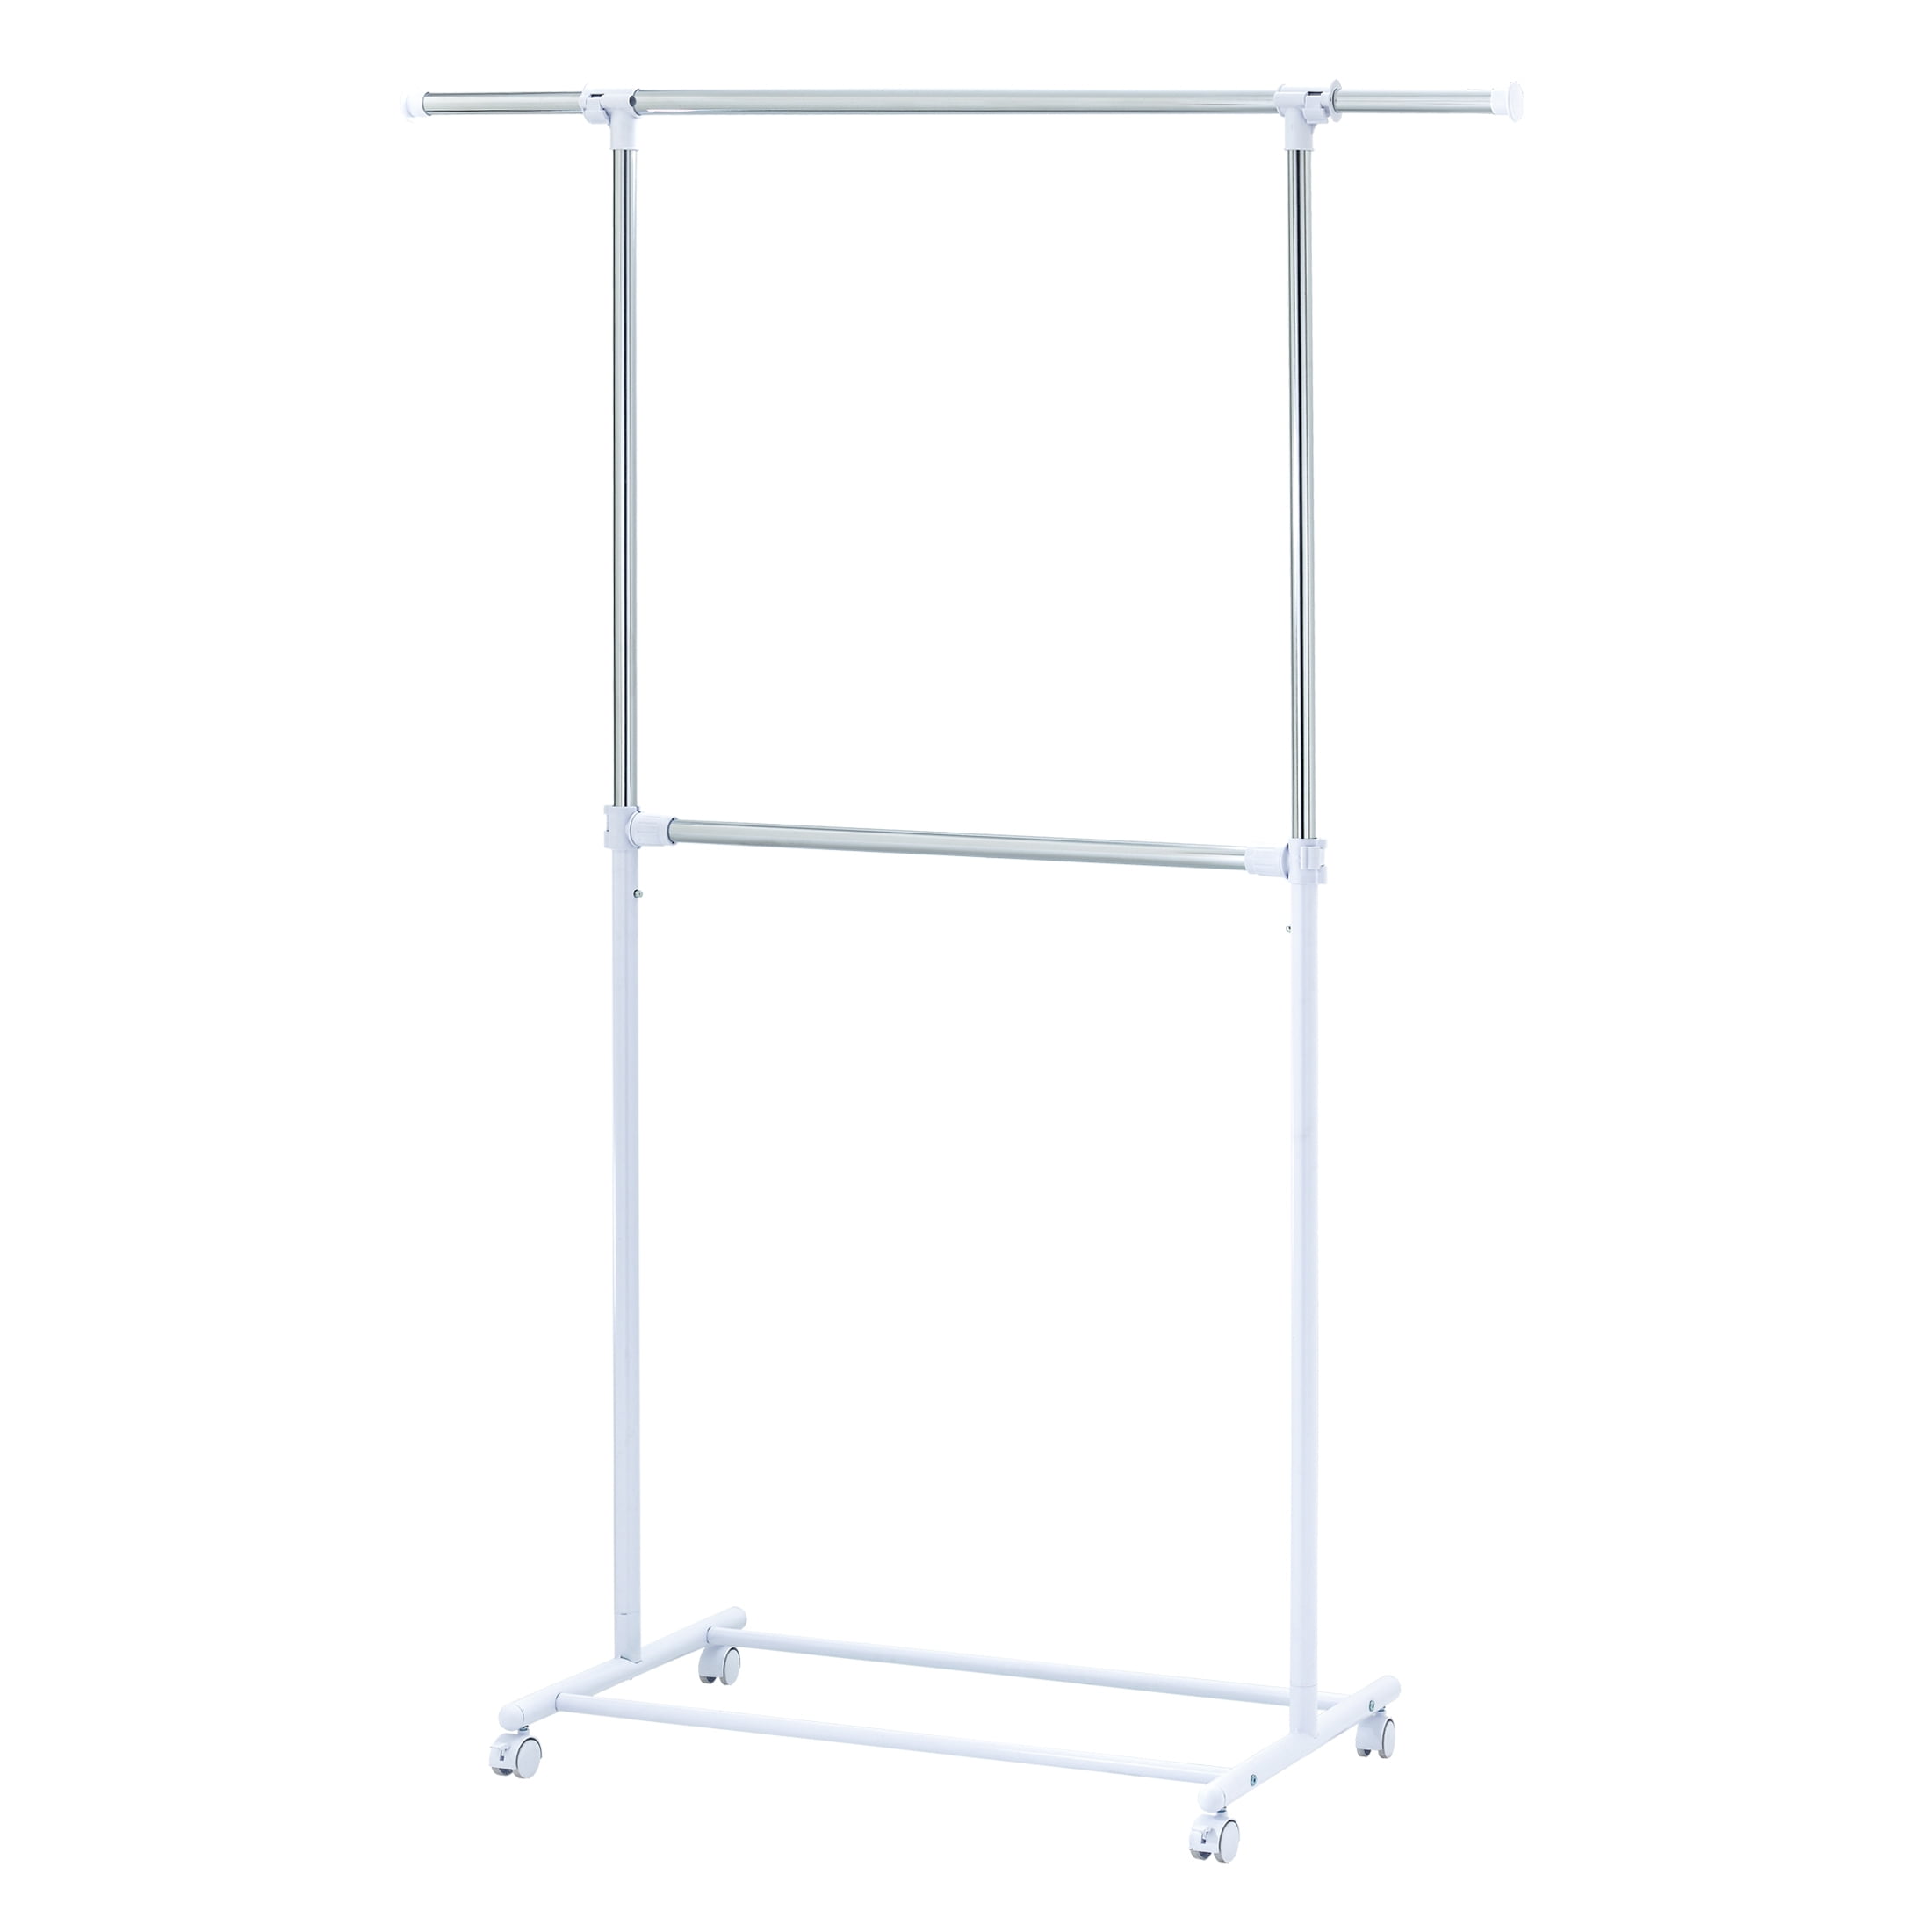 Mainstays 2 Tier Adjustable Chrome Garment Rack with Silver Metal and ...